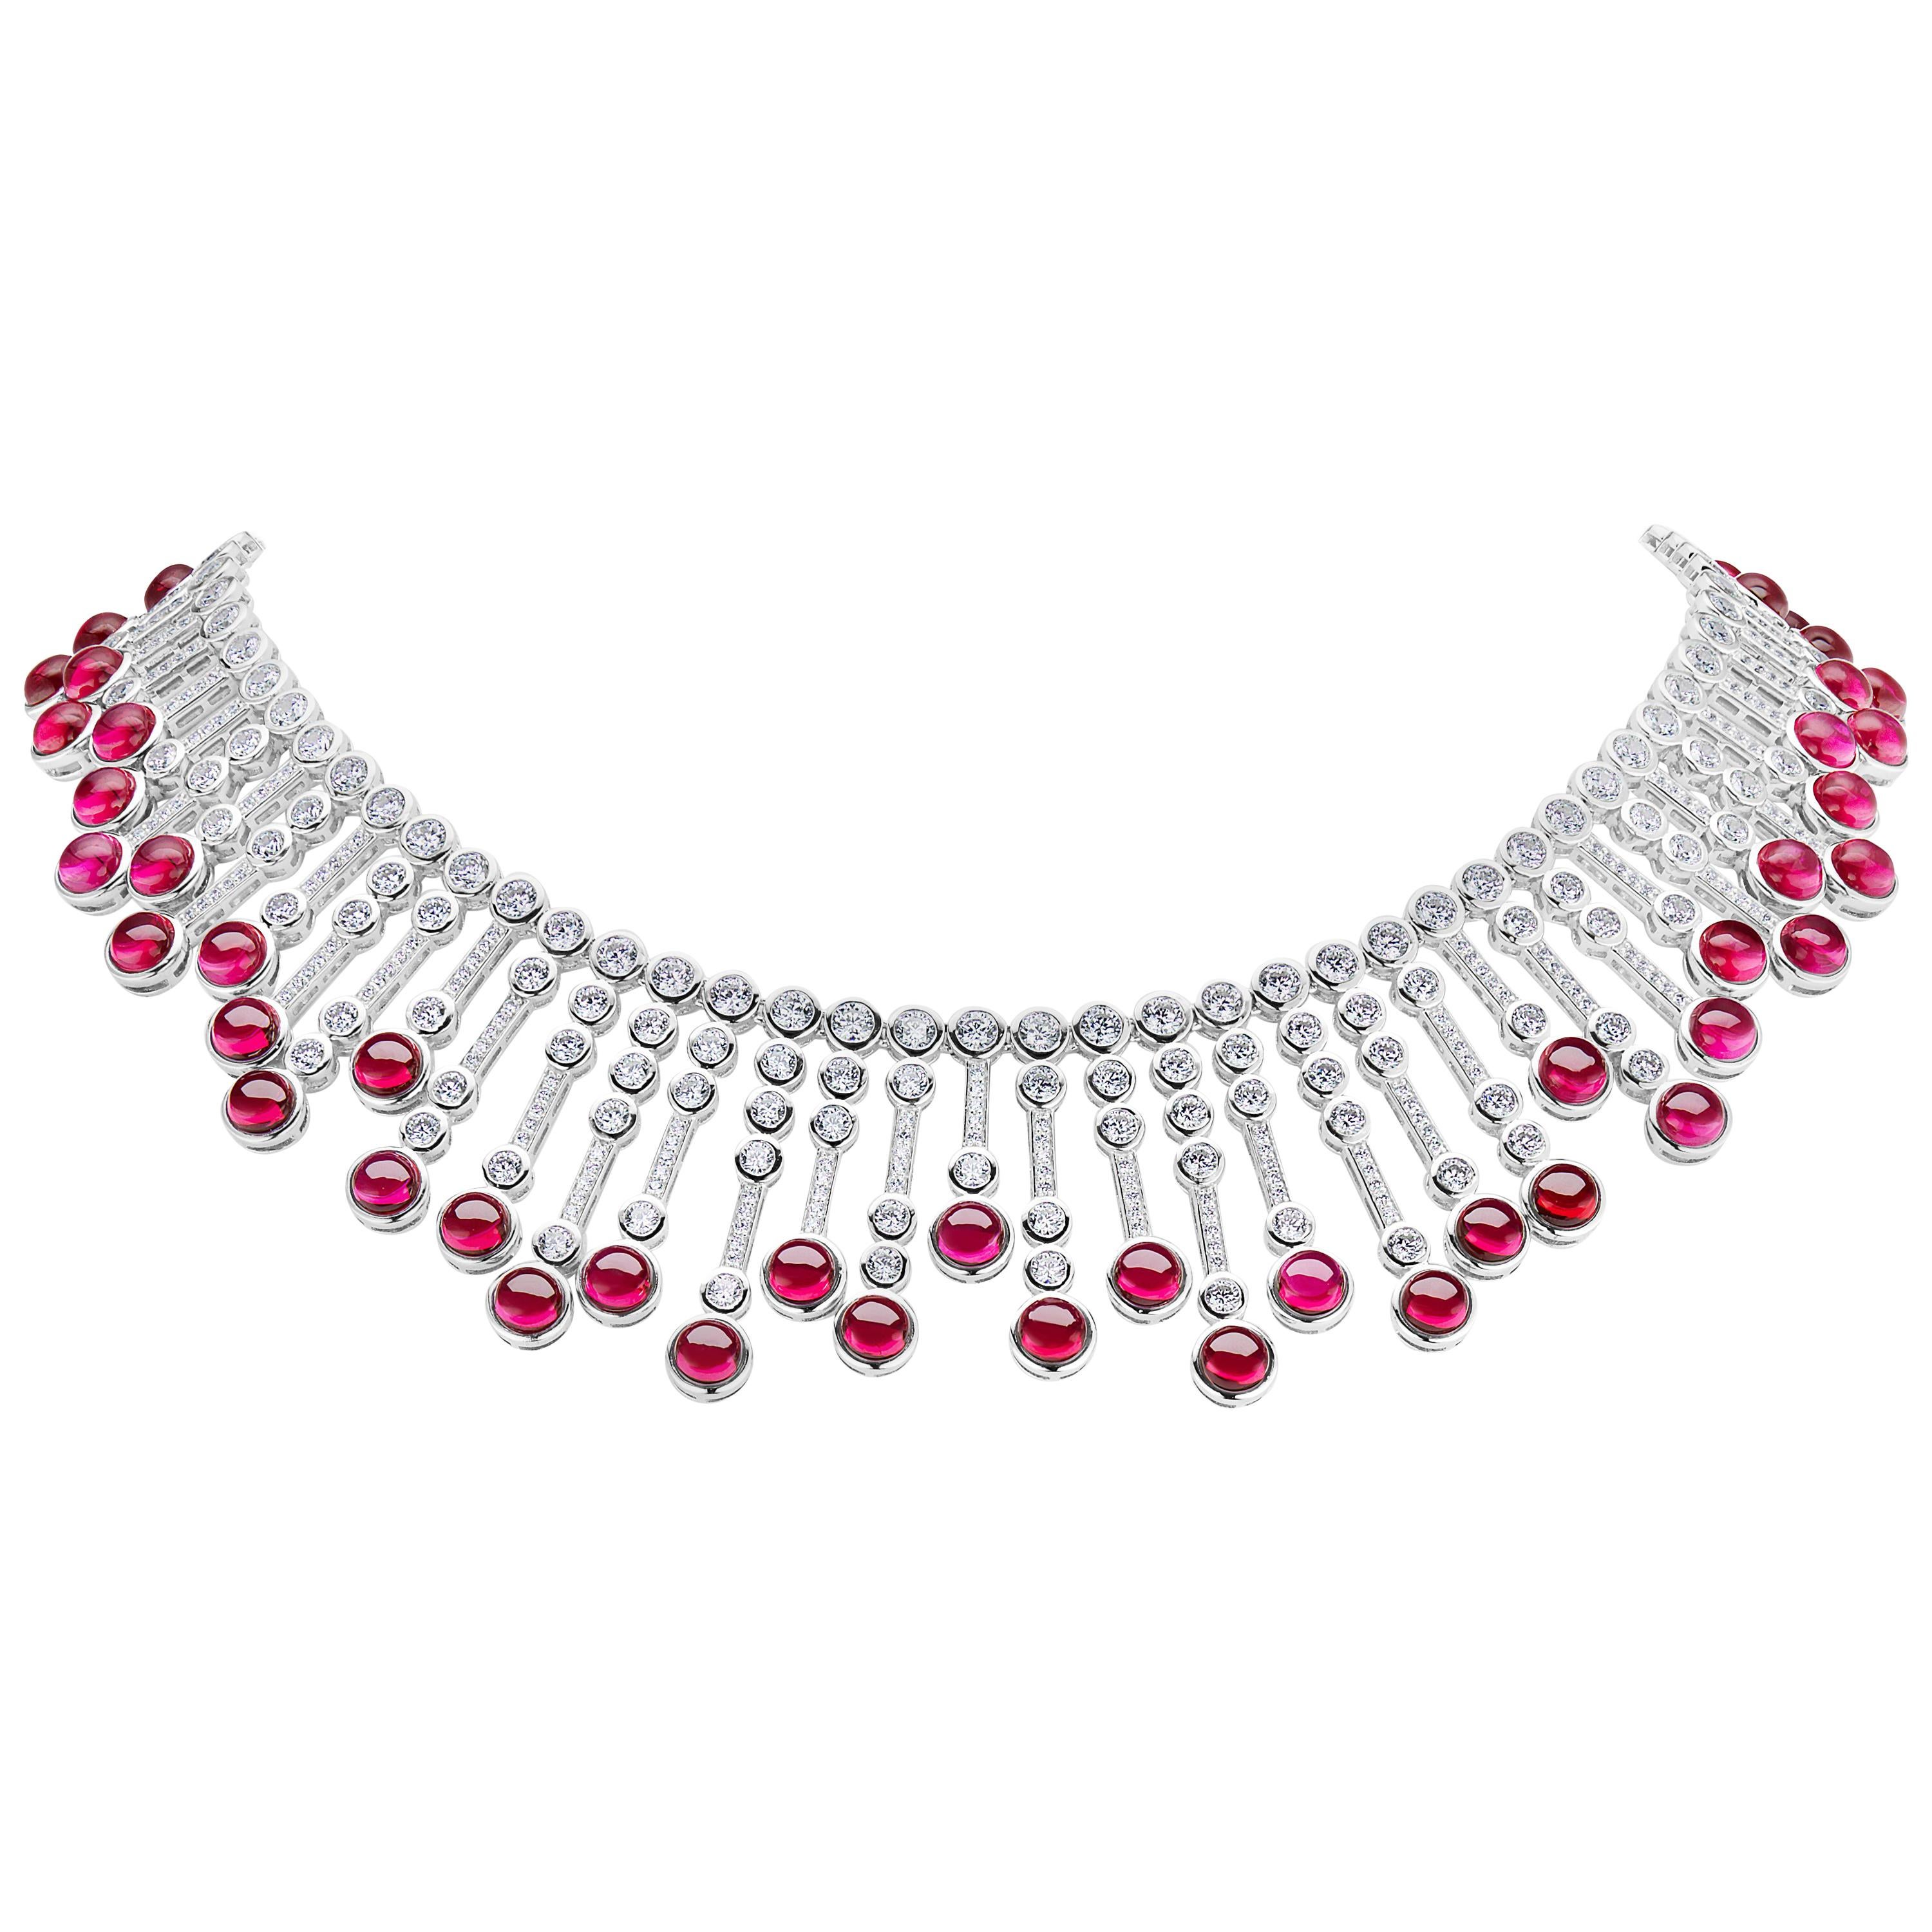 Magnificent Costume Jewelry Man-Made Cabochon Burma Ruby Diamond Fringe Sterling Silver Necklace of Alternating Gem Tipped Cubic Zirconia Set Bars Suspended from a Double Row Bezel CZ Set Sterling Silver Flexible Necklace measures 16 Inches.